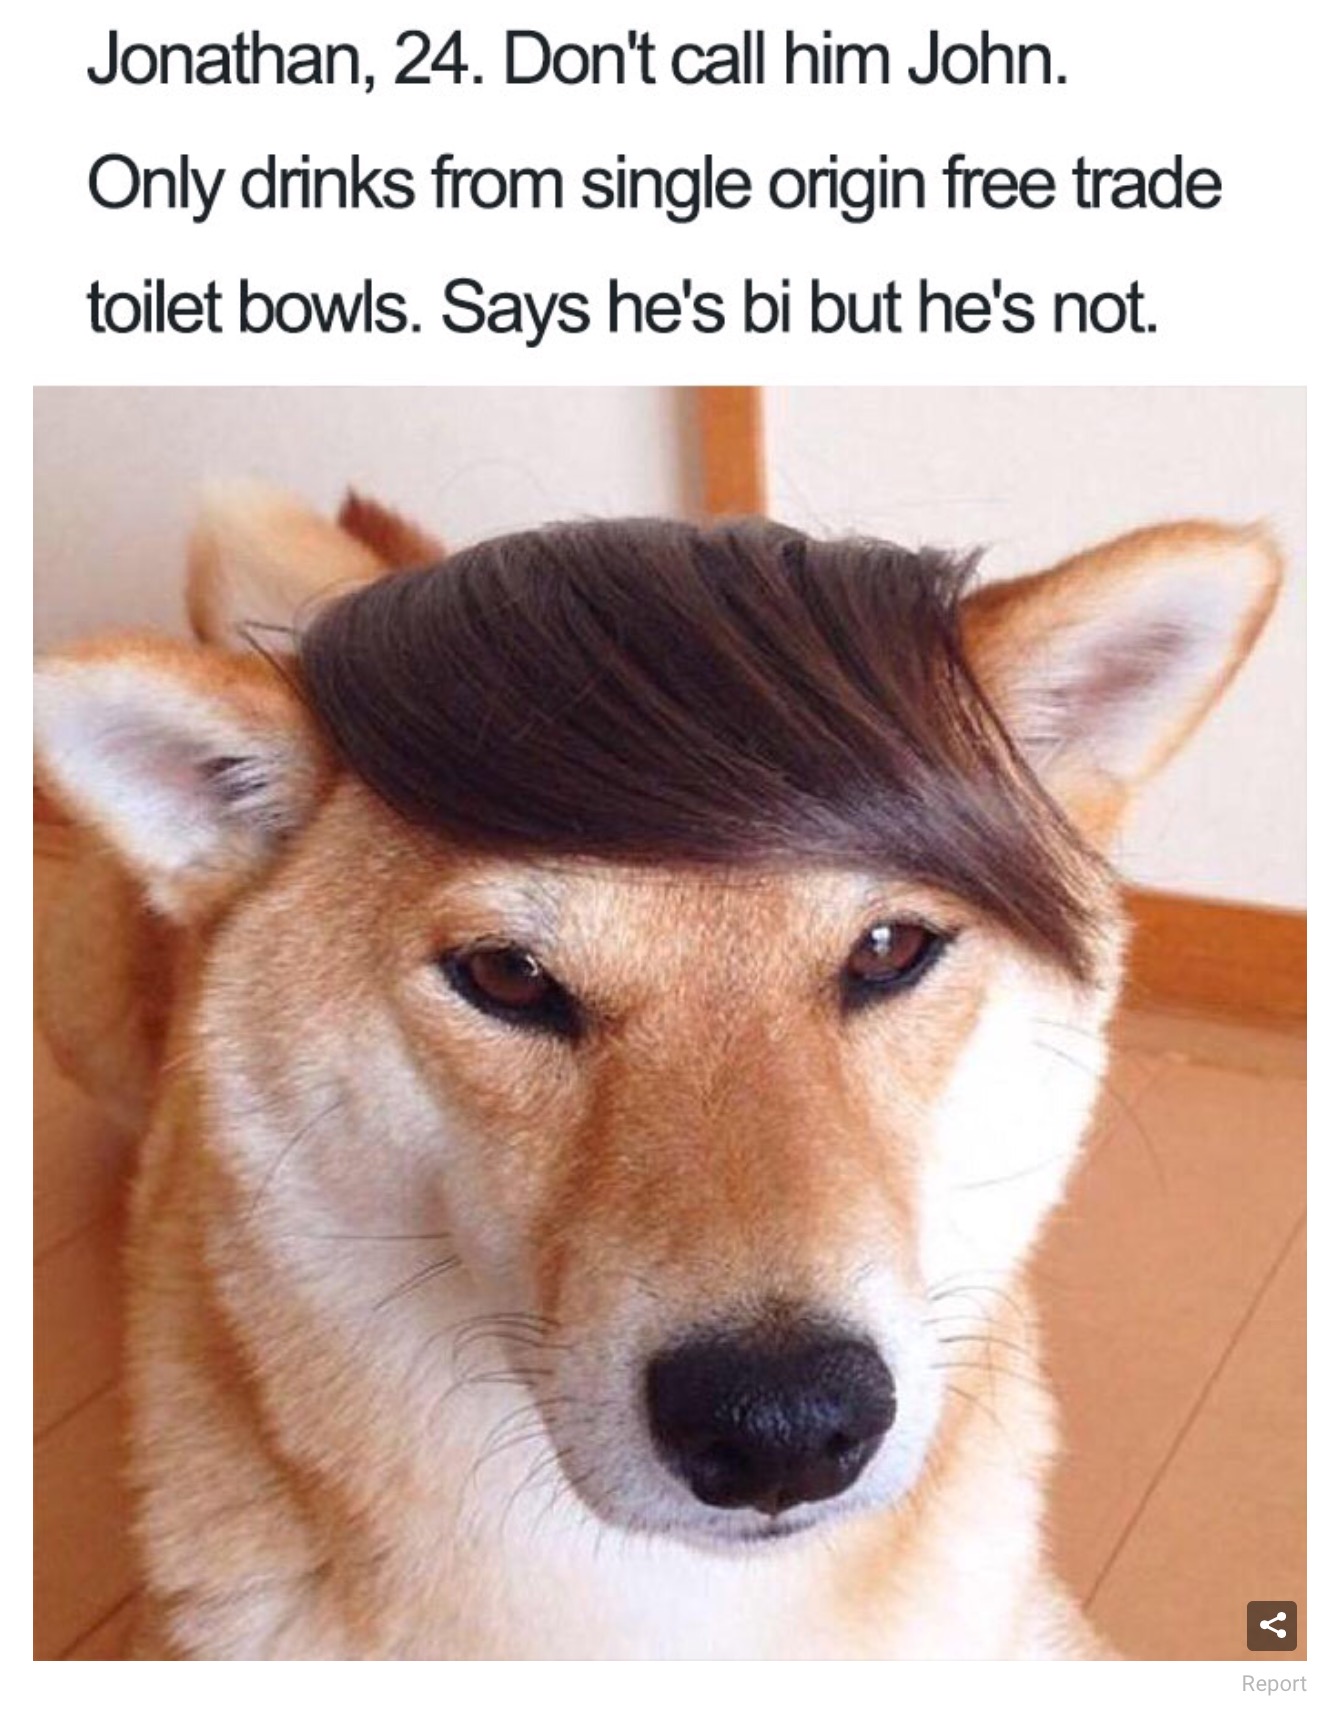 dog with hair meme - Jonathan, 24. Don't call him John. Only drinks from single origin free trade toilet bowls. Says he's bi but he's not. Report